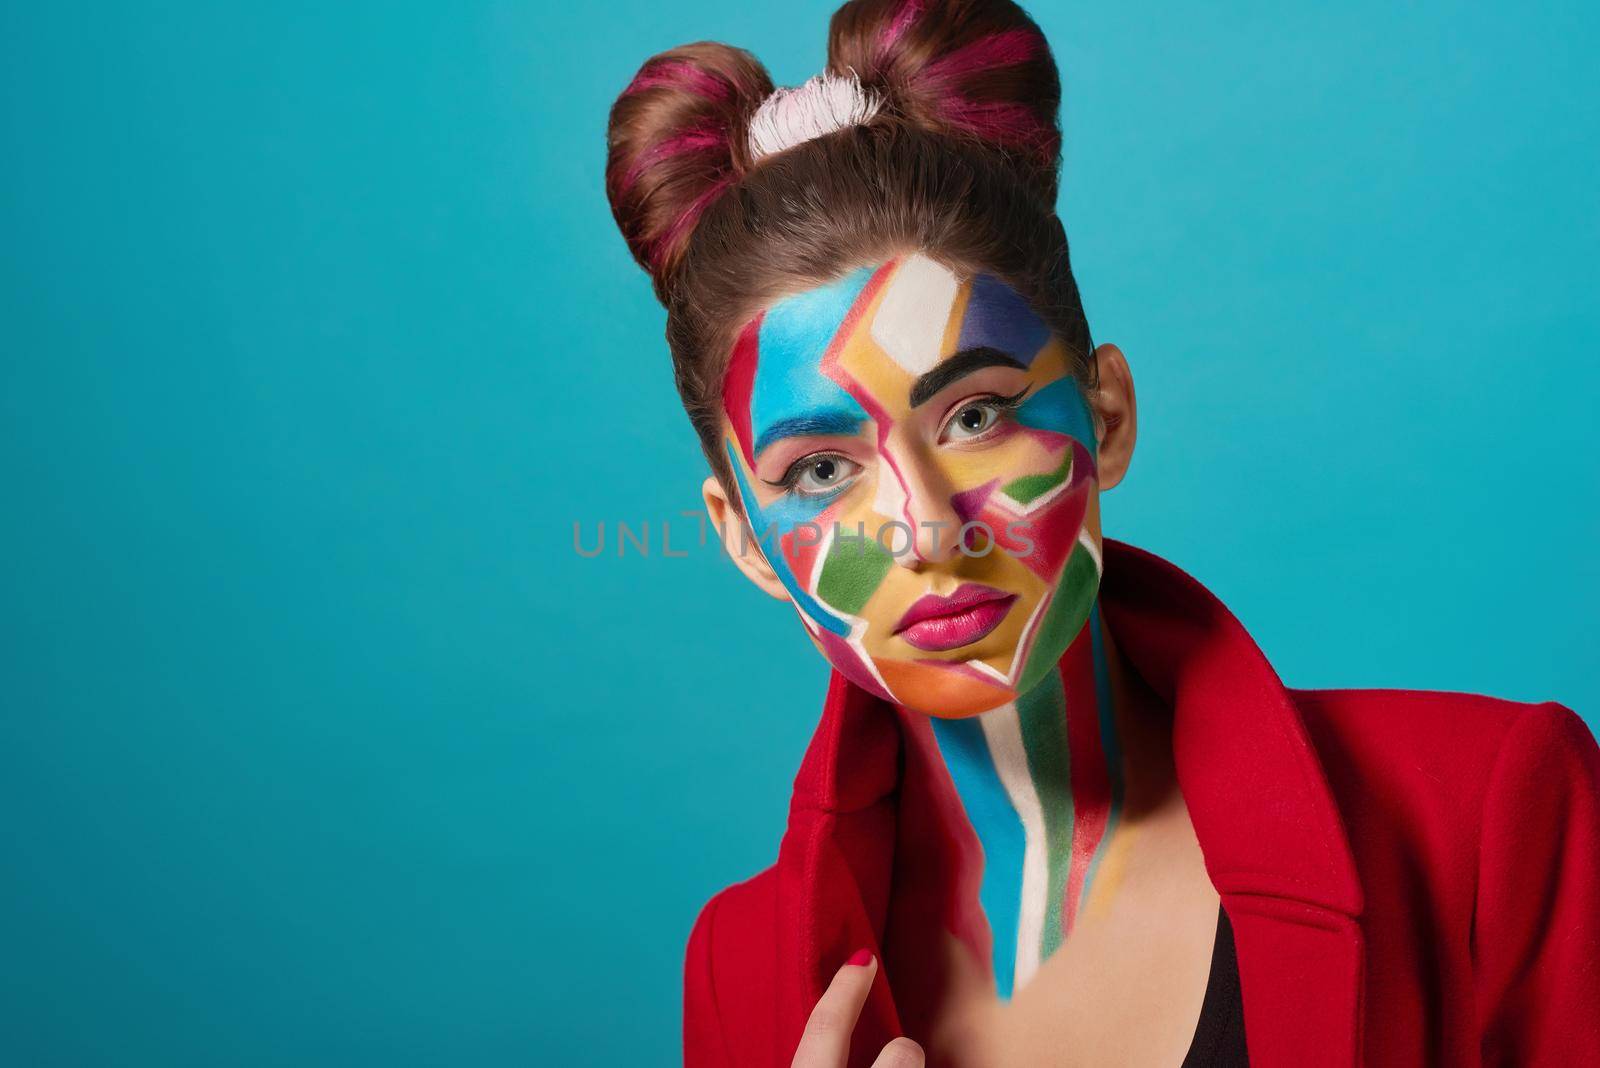 Model has bow hairstyle, funky pop art make up. by SerhiiBobyk